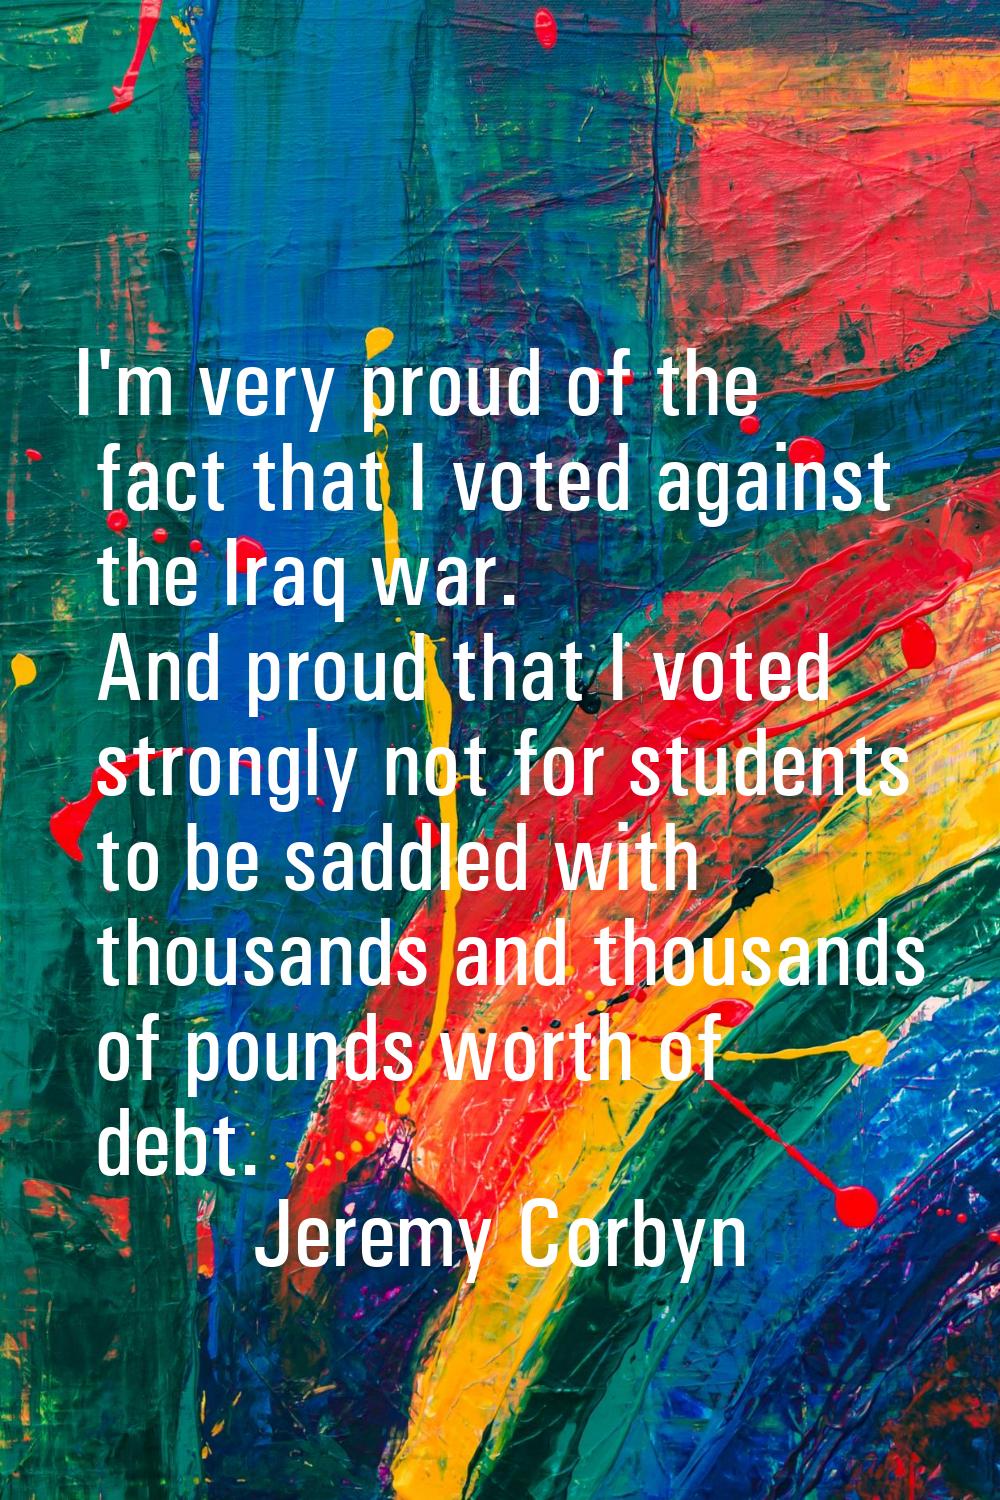 I'm very proud of the fact that I voted against the Iraq war. And proud that I voted strongly not f